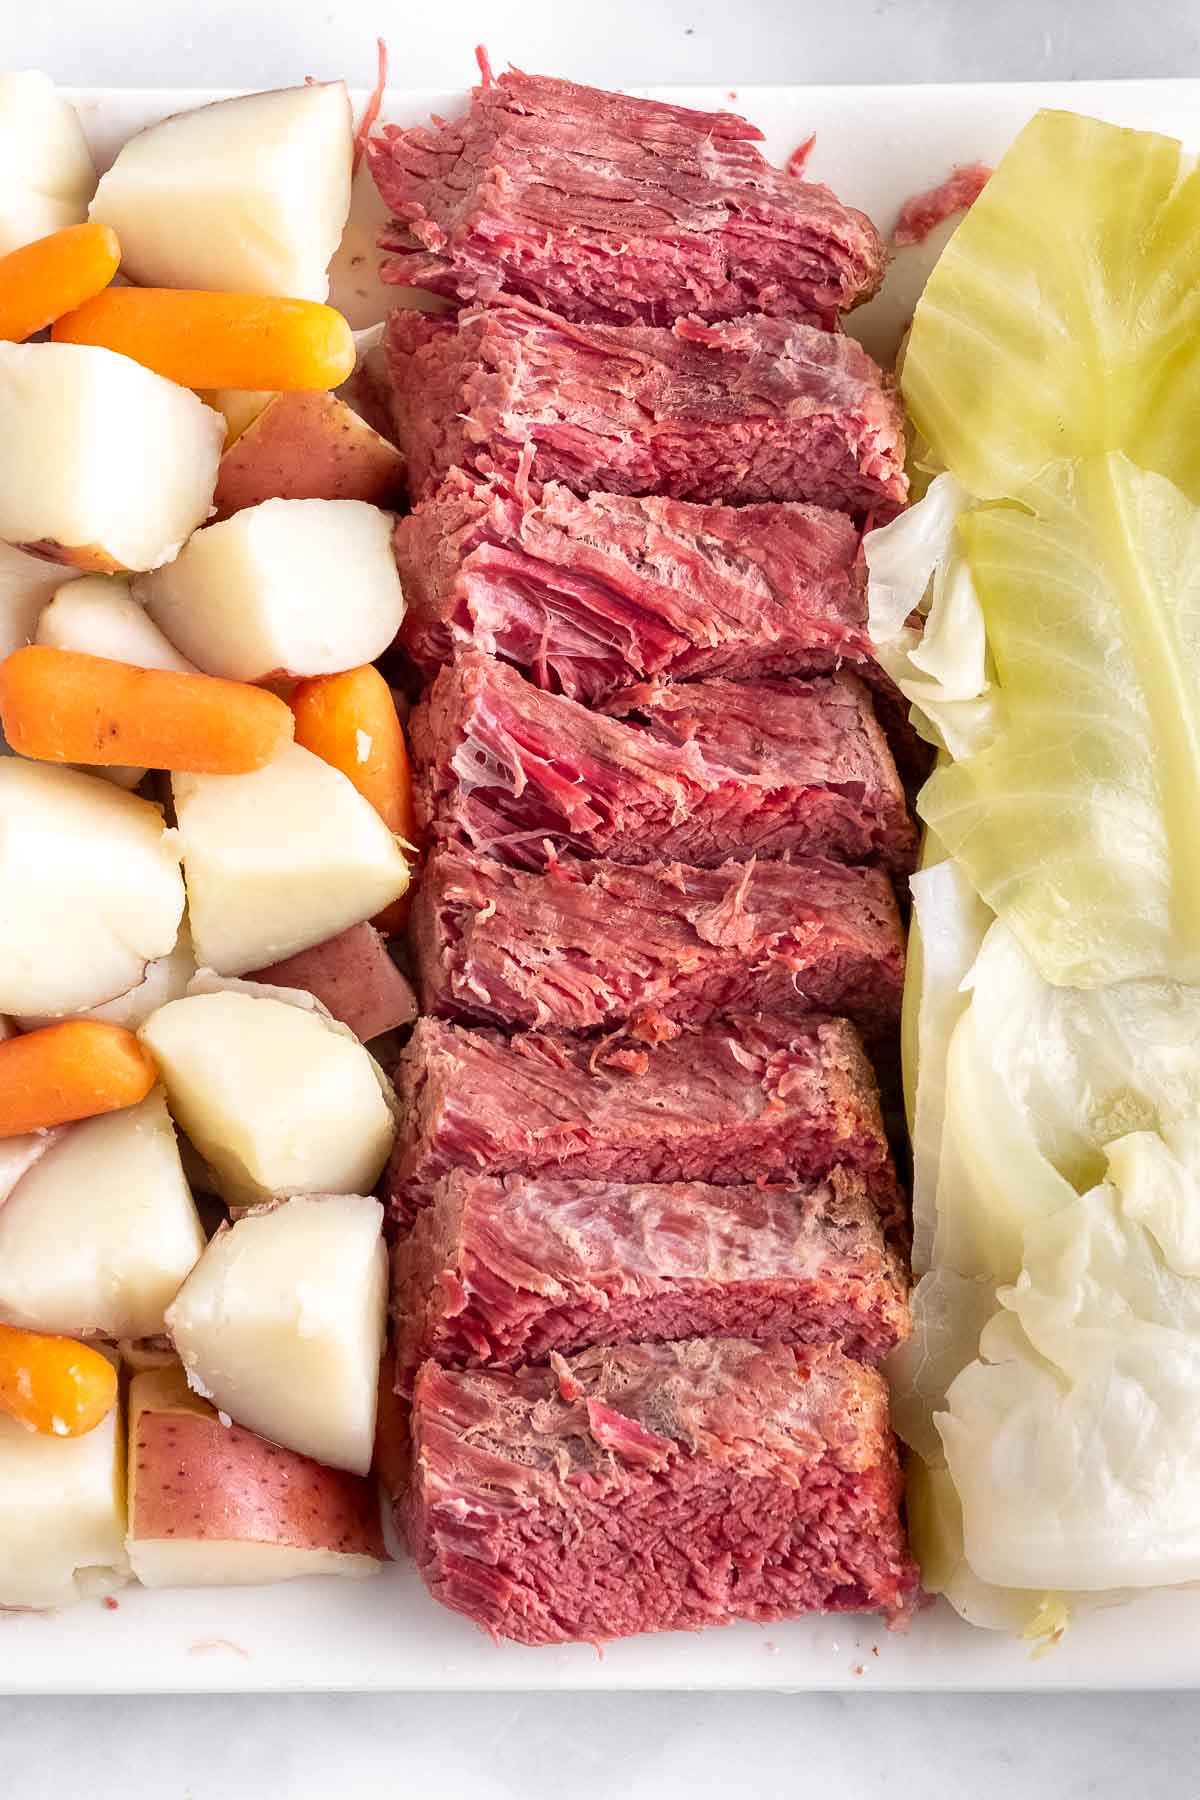 platter with rows of sliced corned beef, cut potatoes, baby carrots and cabbage